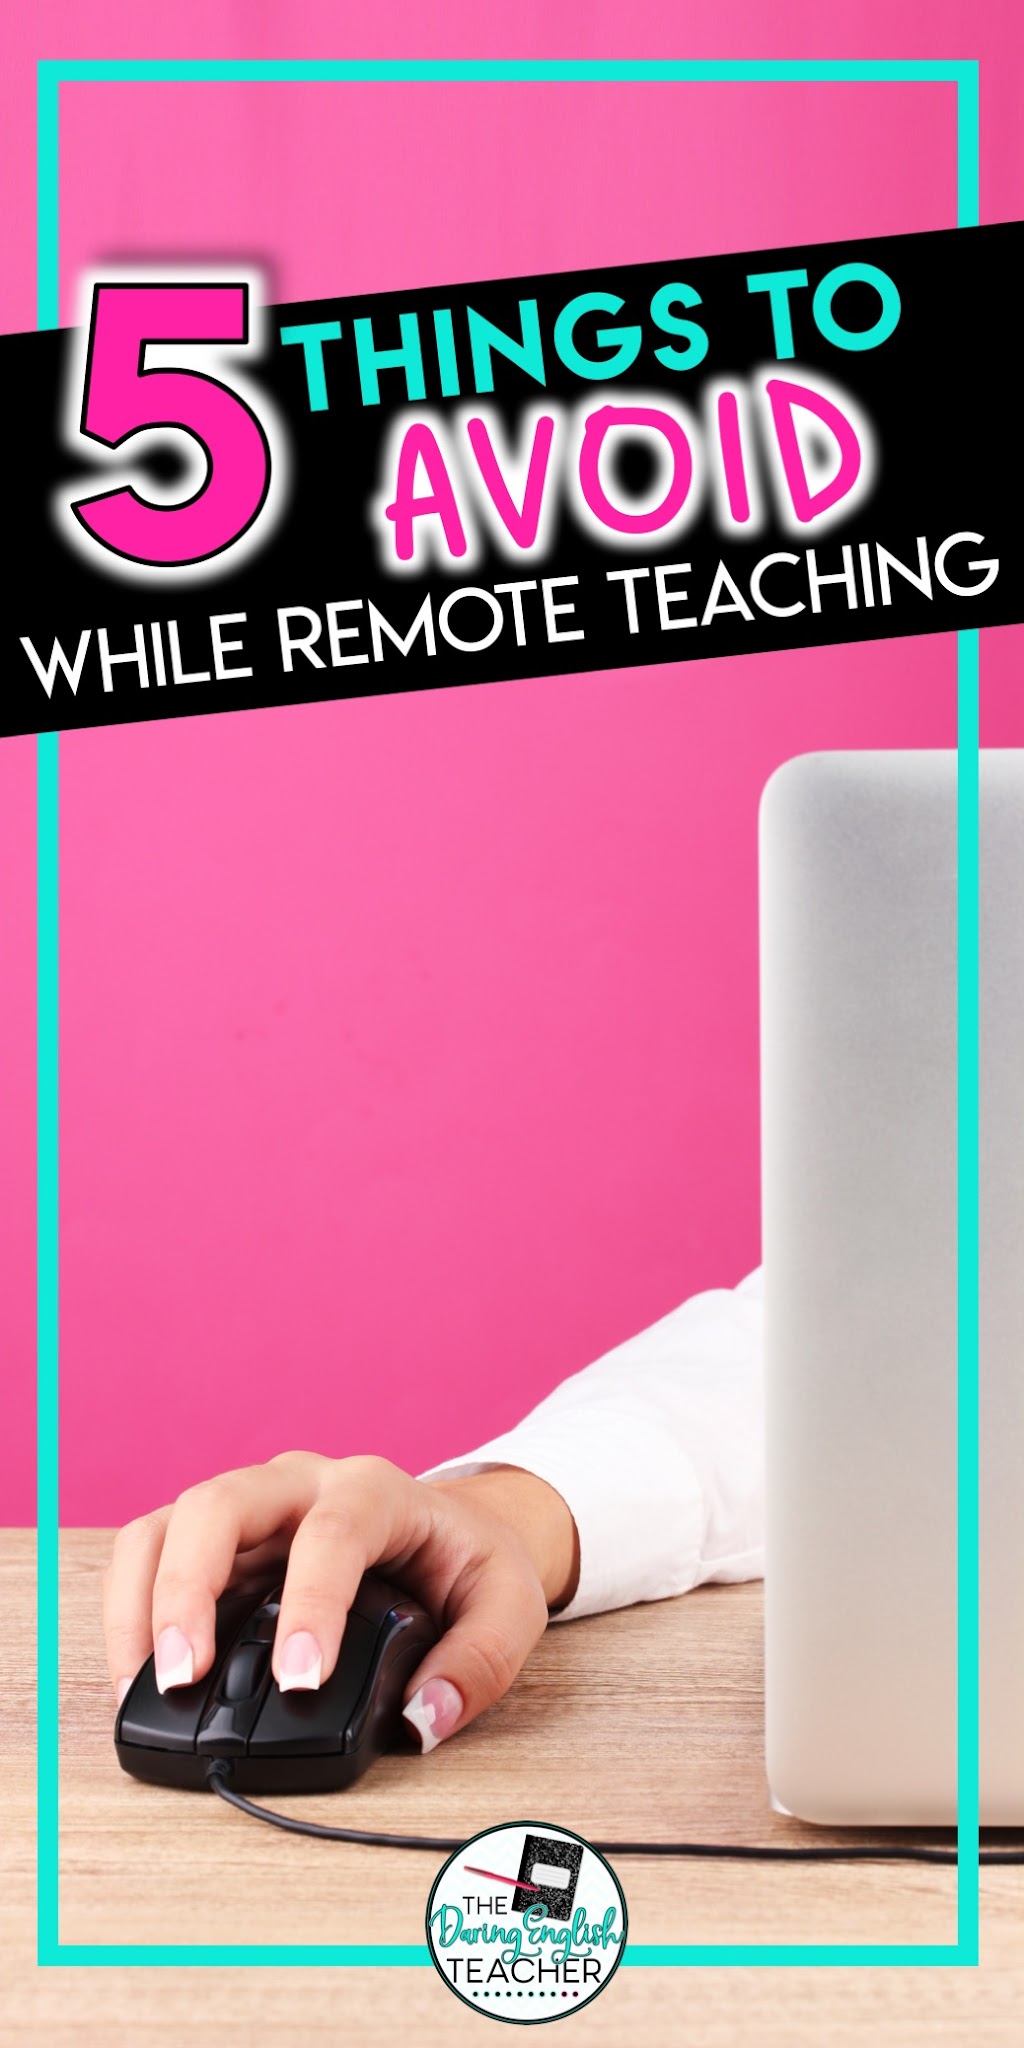 5 Things to Avoid While Remote Teaching